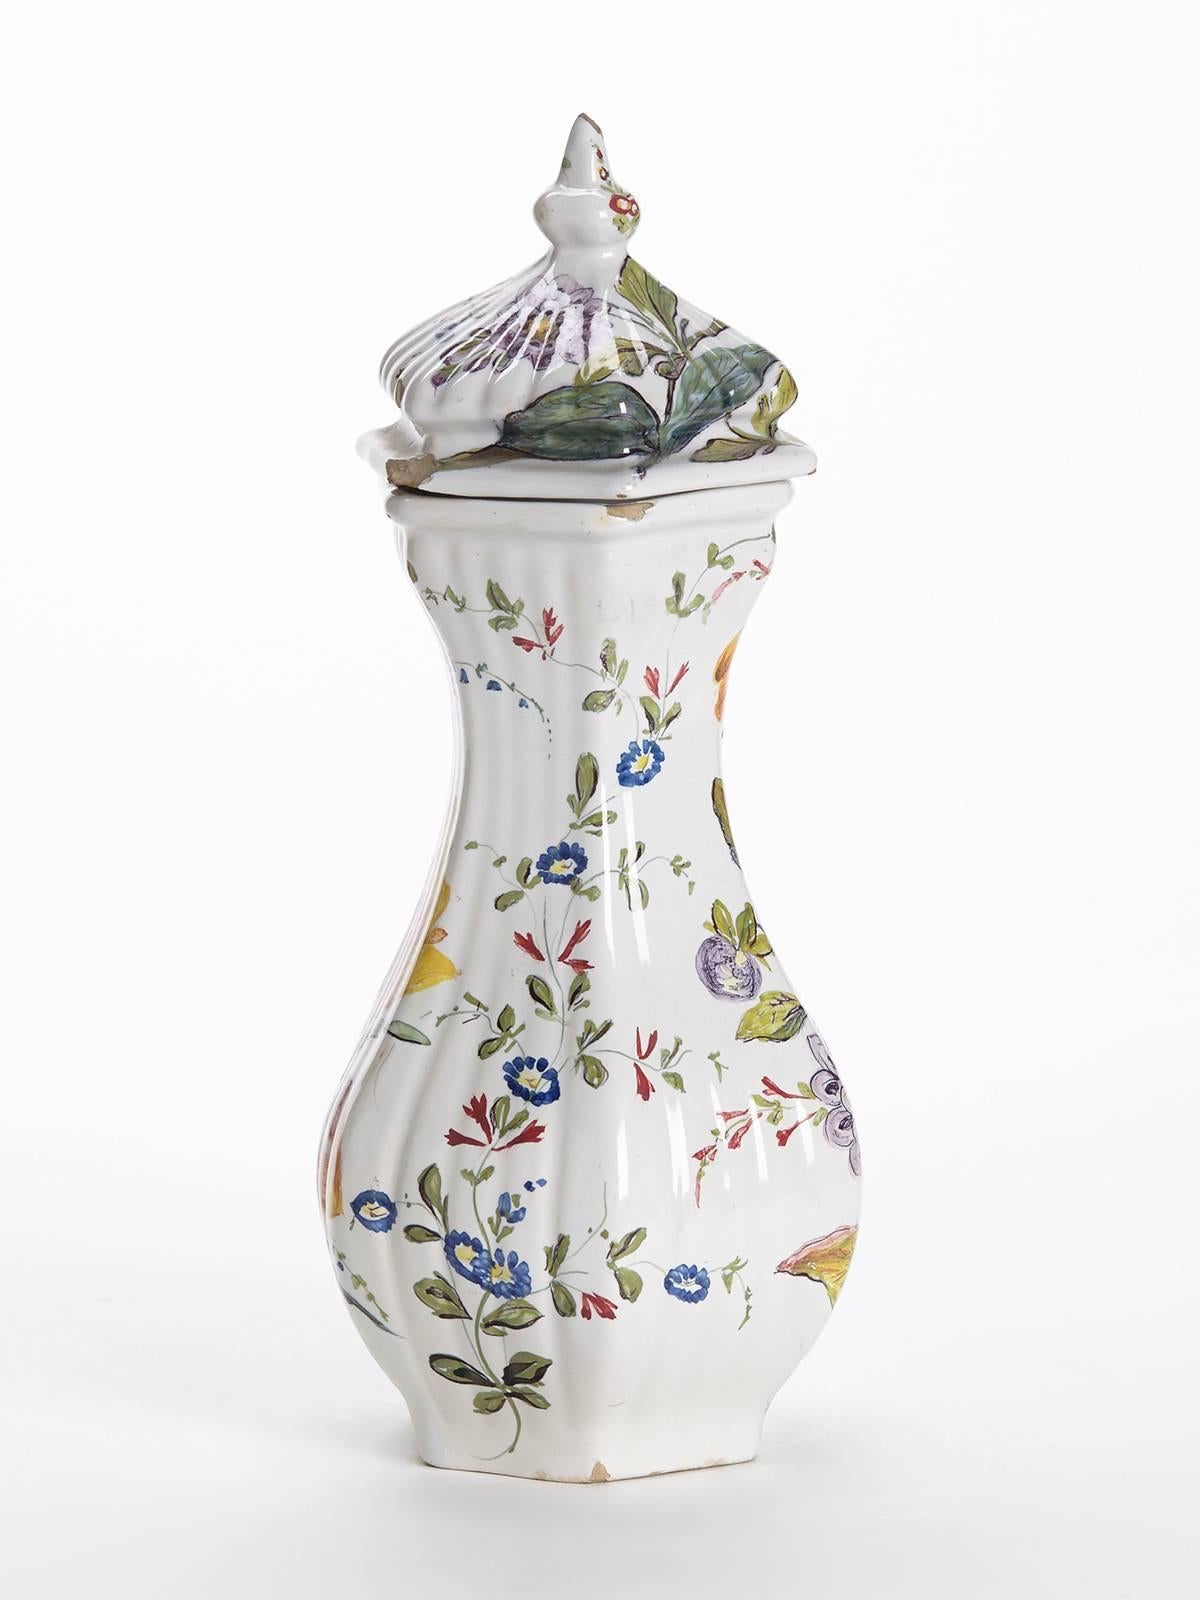 A fine and elegant antique Italian Le Nove floral painted faience vase and cover. The earthenware hexagonal shaped vase has a moulded ribbed body exquisitely hand-painted with bright floral designs on a white ground. The vase has a similarly shaped